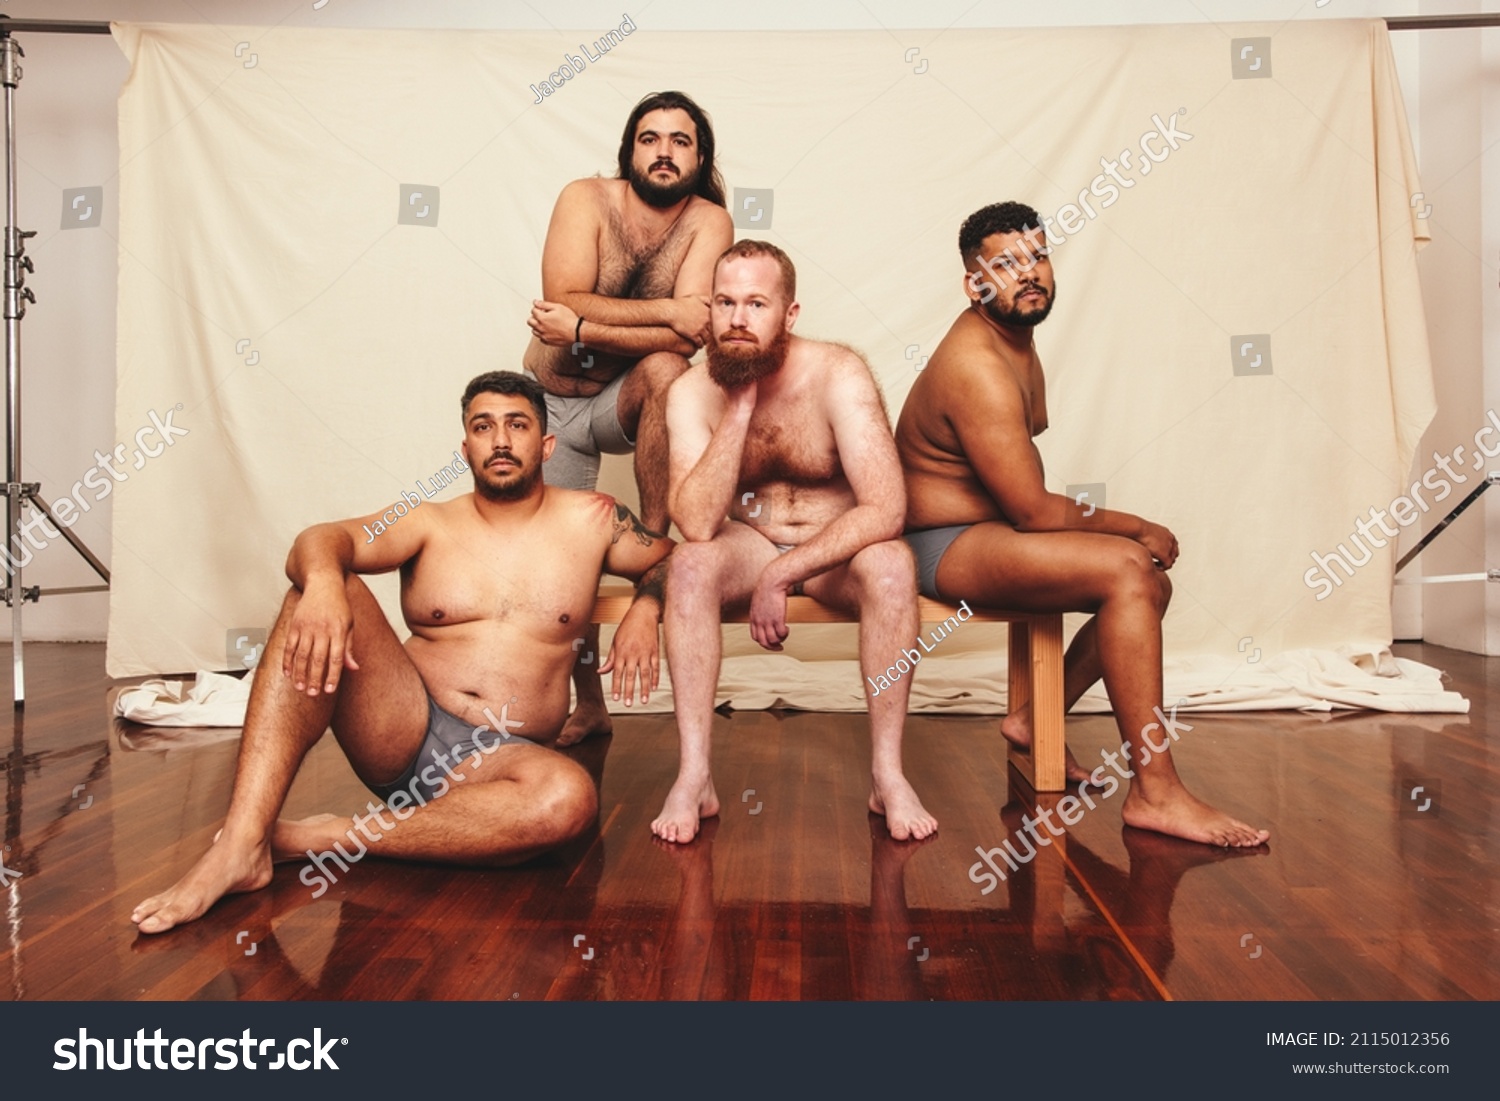 Shirtless and confident. Four body positive men looking at the camera while wearing underwear in a studio. Group of self-assured men embracing their natural bodies together. #2115012356